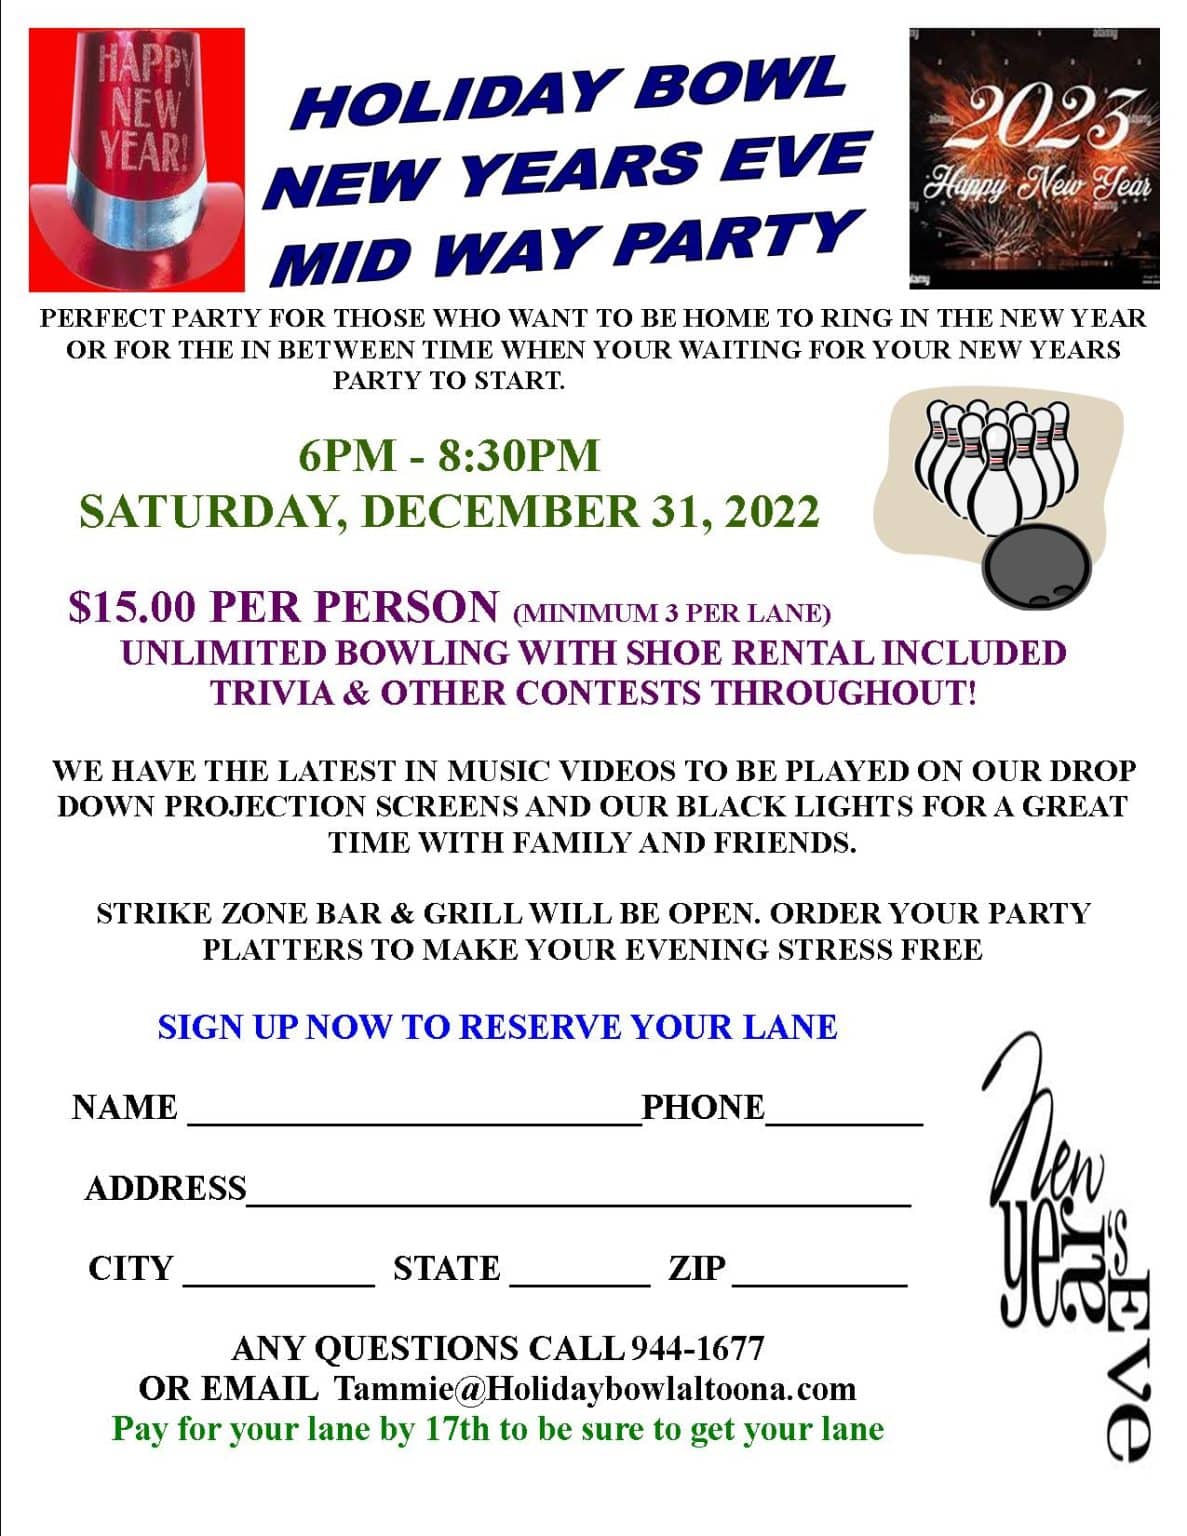 Holiday Bowl New Year's Eve Midway Party 6pm to 830pm Holiday Bowl